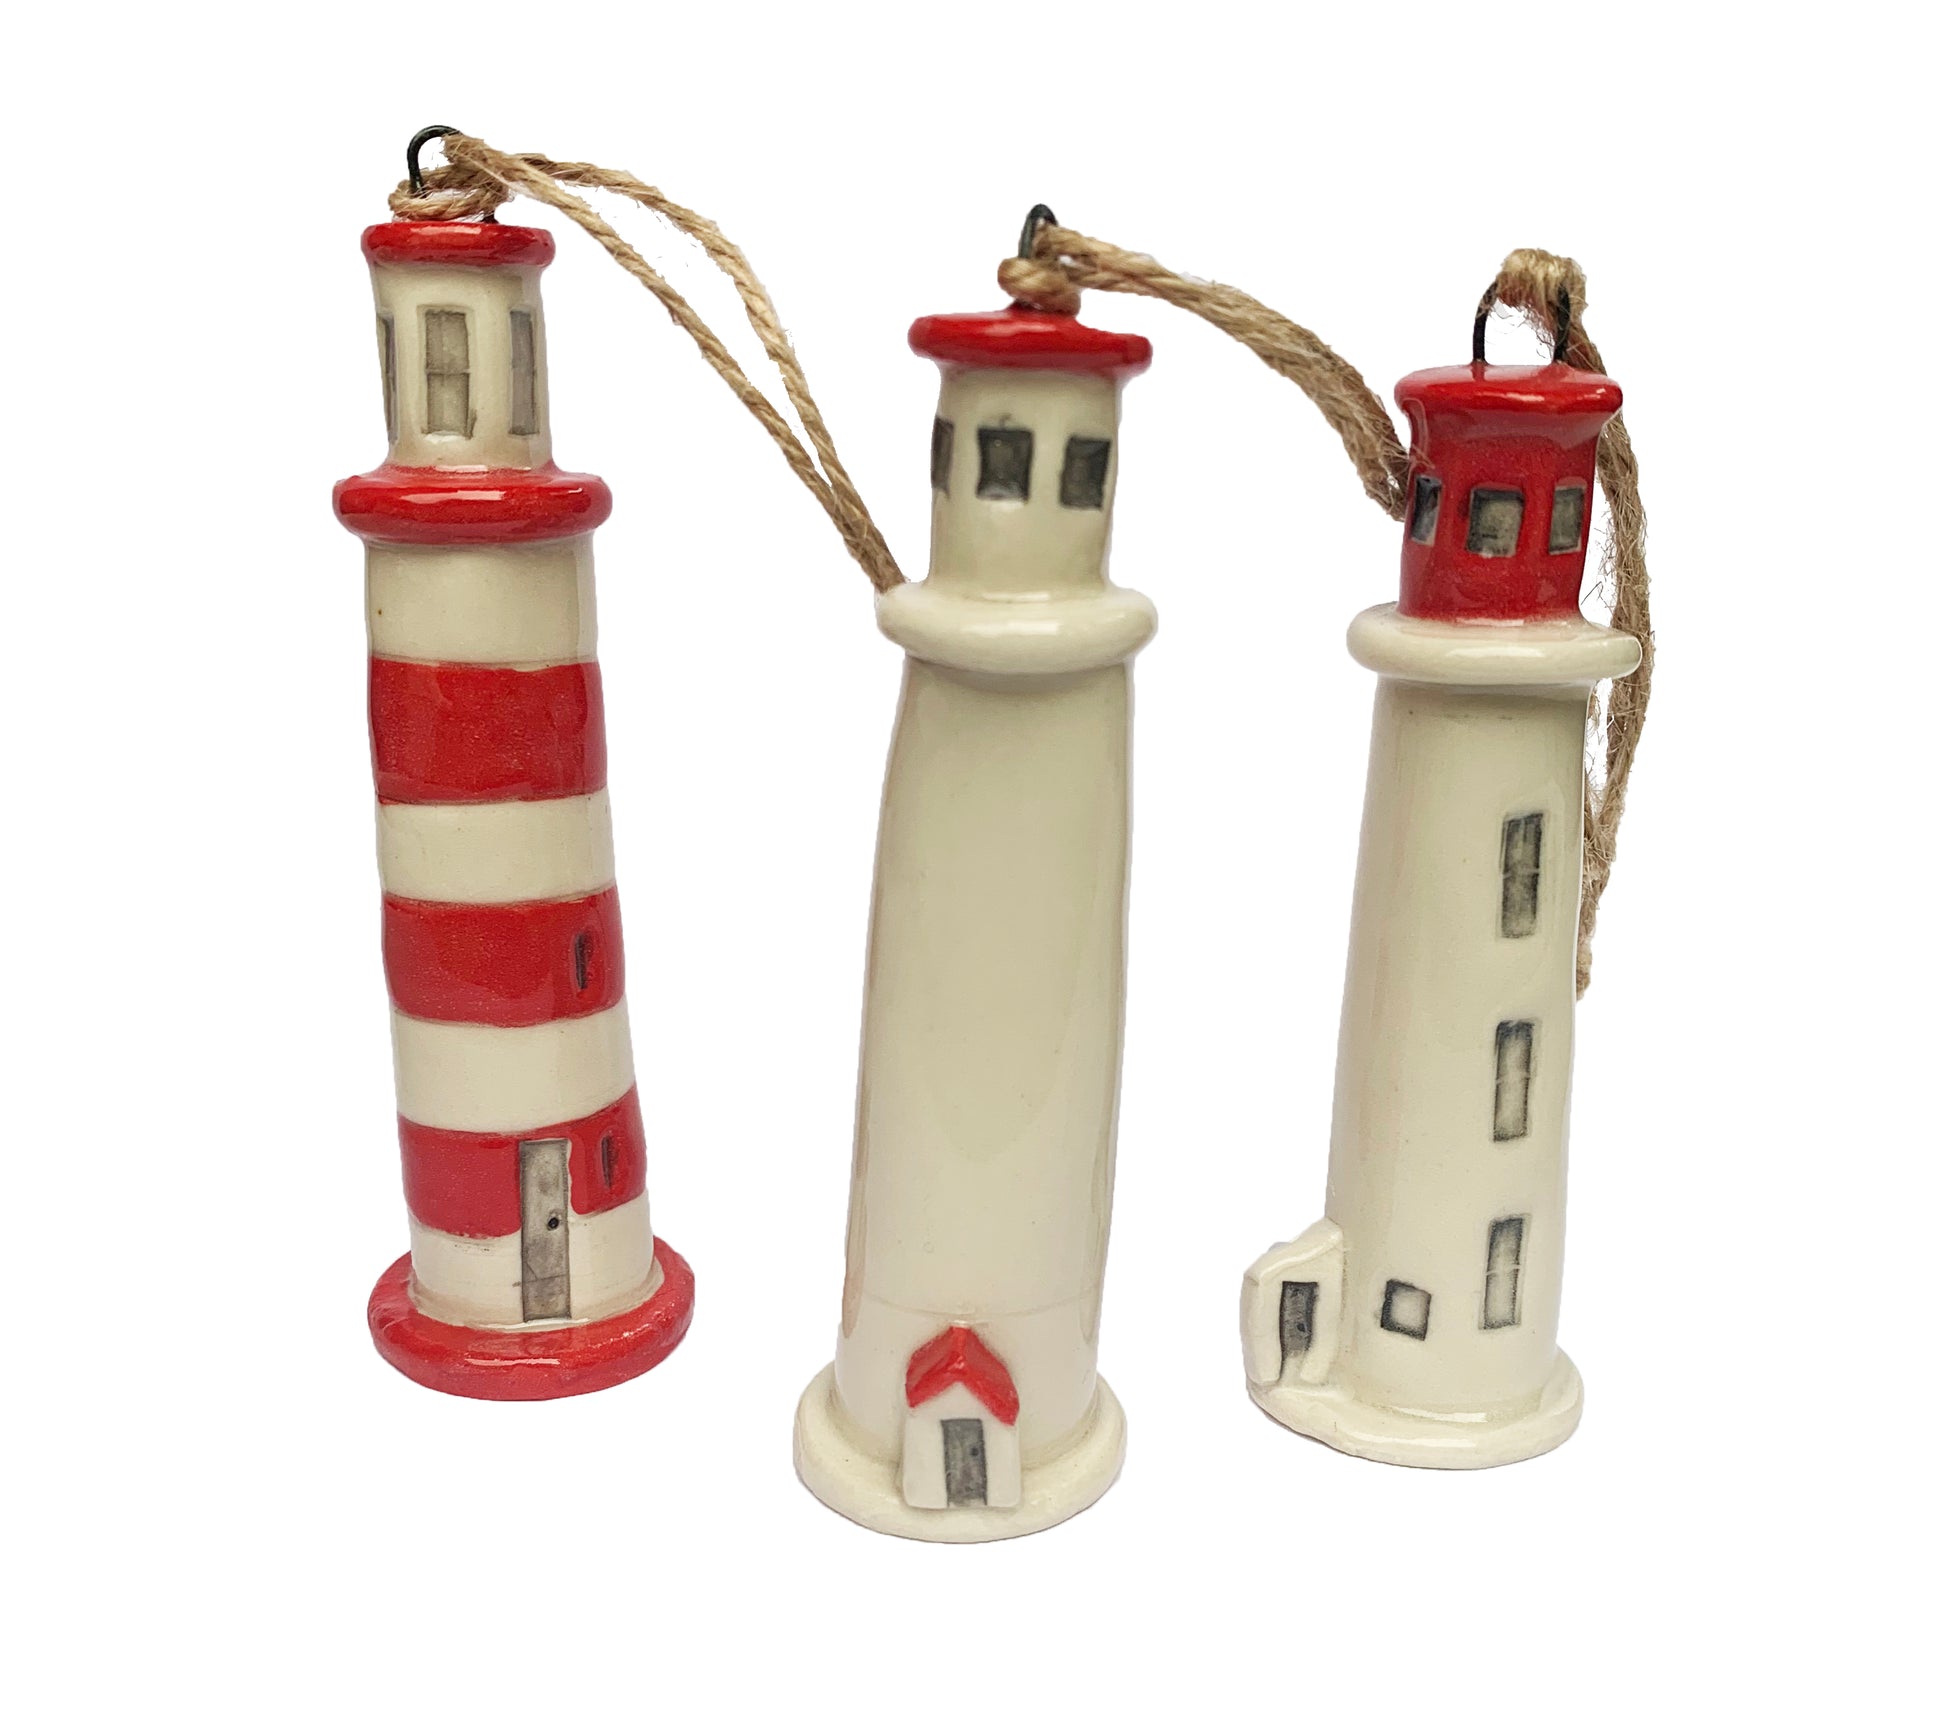 Three hand painted ceramic lighthouse ornaments, made in Nova Scotia, Canada.